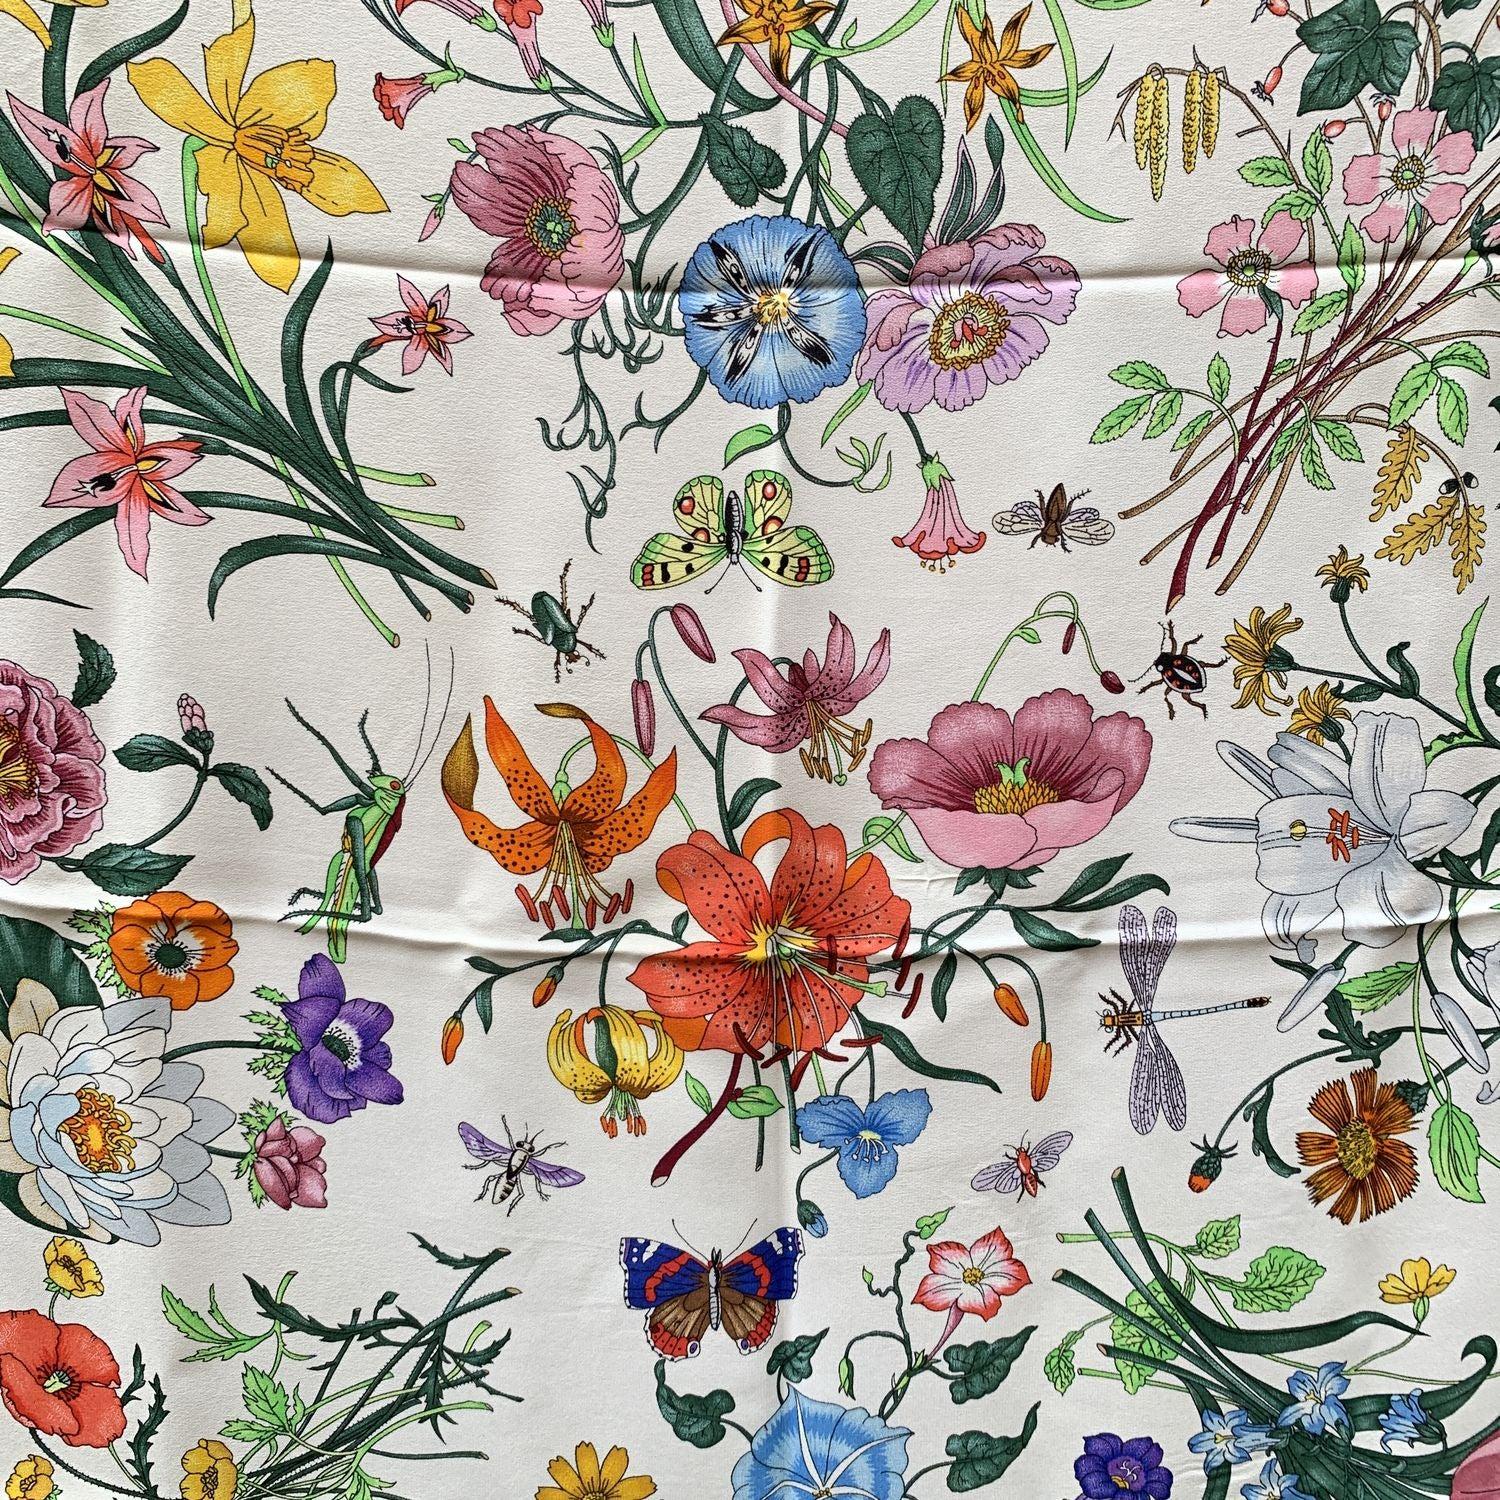 The Flora silk scarf born in 1966 by the artist Vittorio Accornero. He was the textile designer for Gucci between the 1960s and 1981. The Flora design is a magical and delicate composition of flowers, berries and insects depicted with the precision